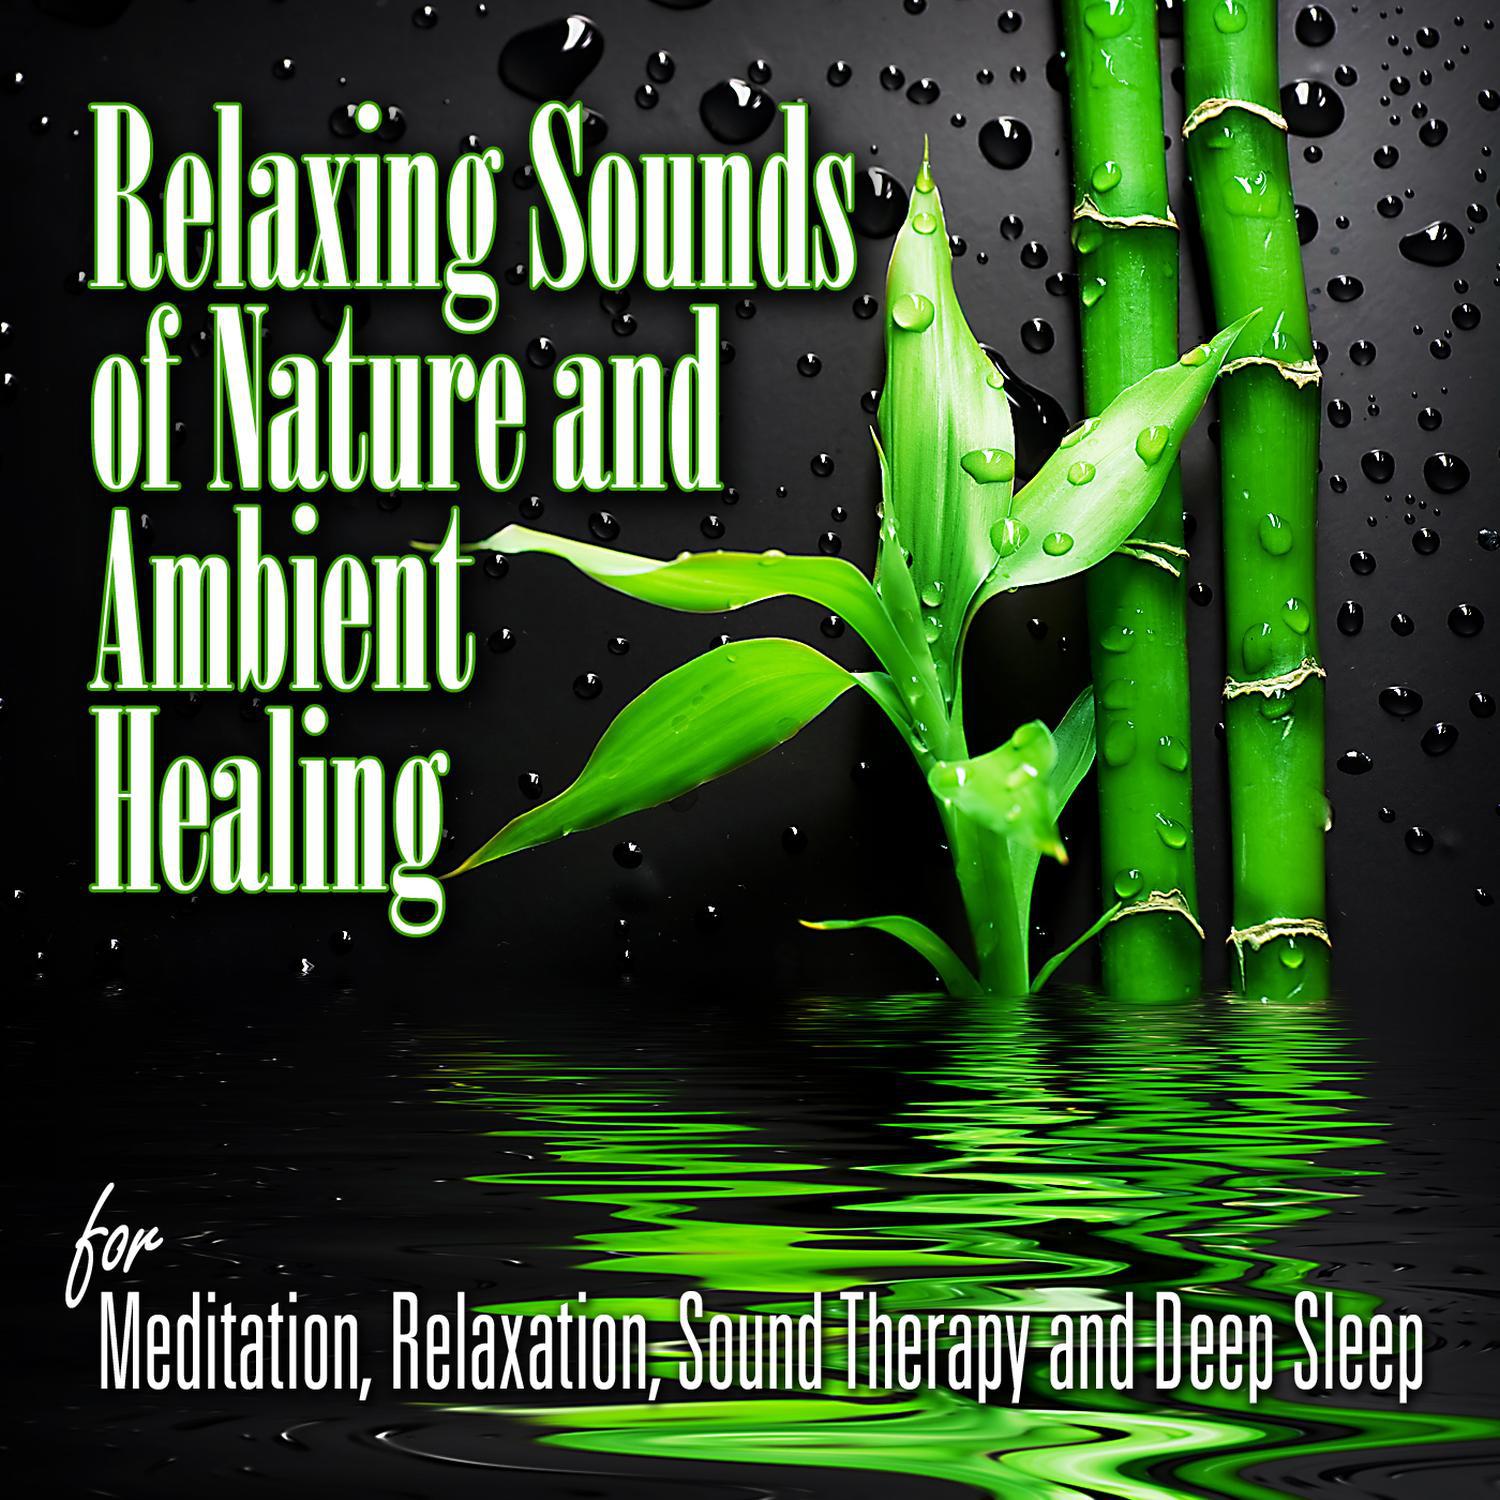 Sounds of Nature Relaxation - Mighty Thunderstorm with Wind and Rain for Well Being and Spiritual Healing